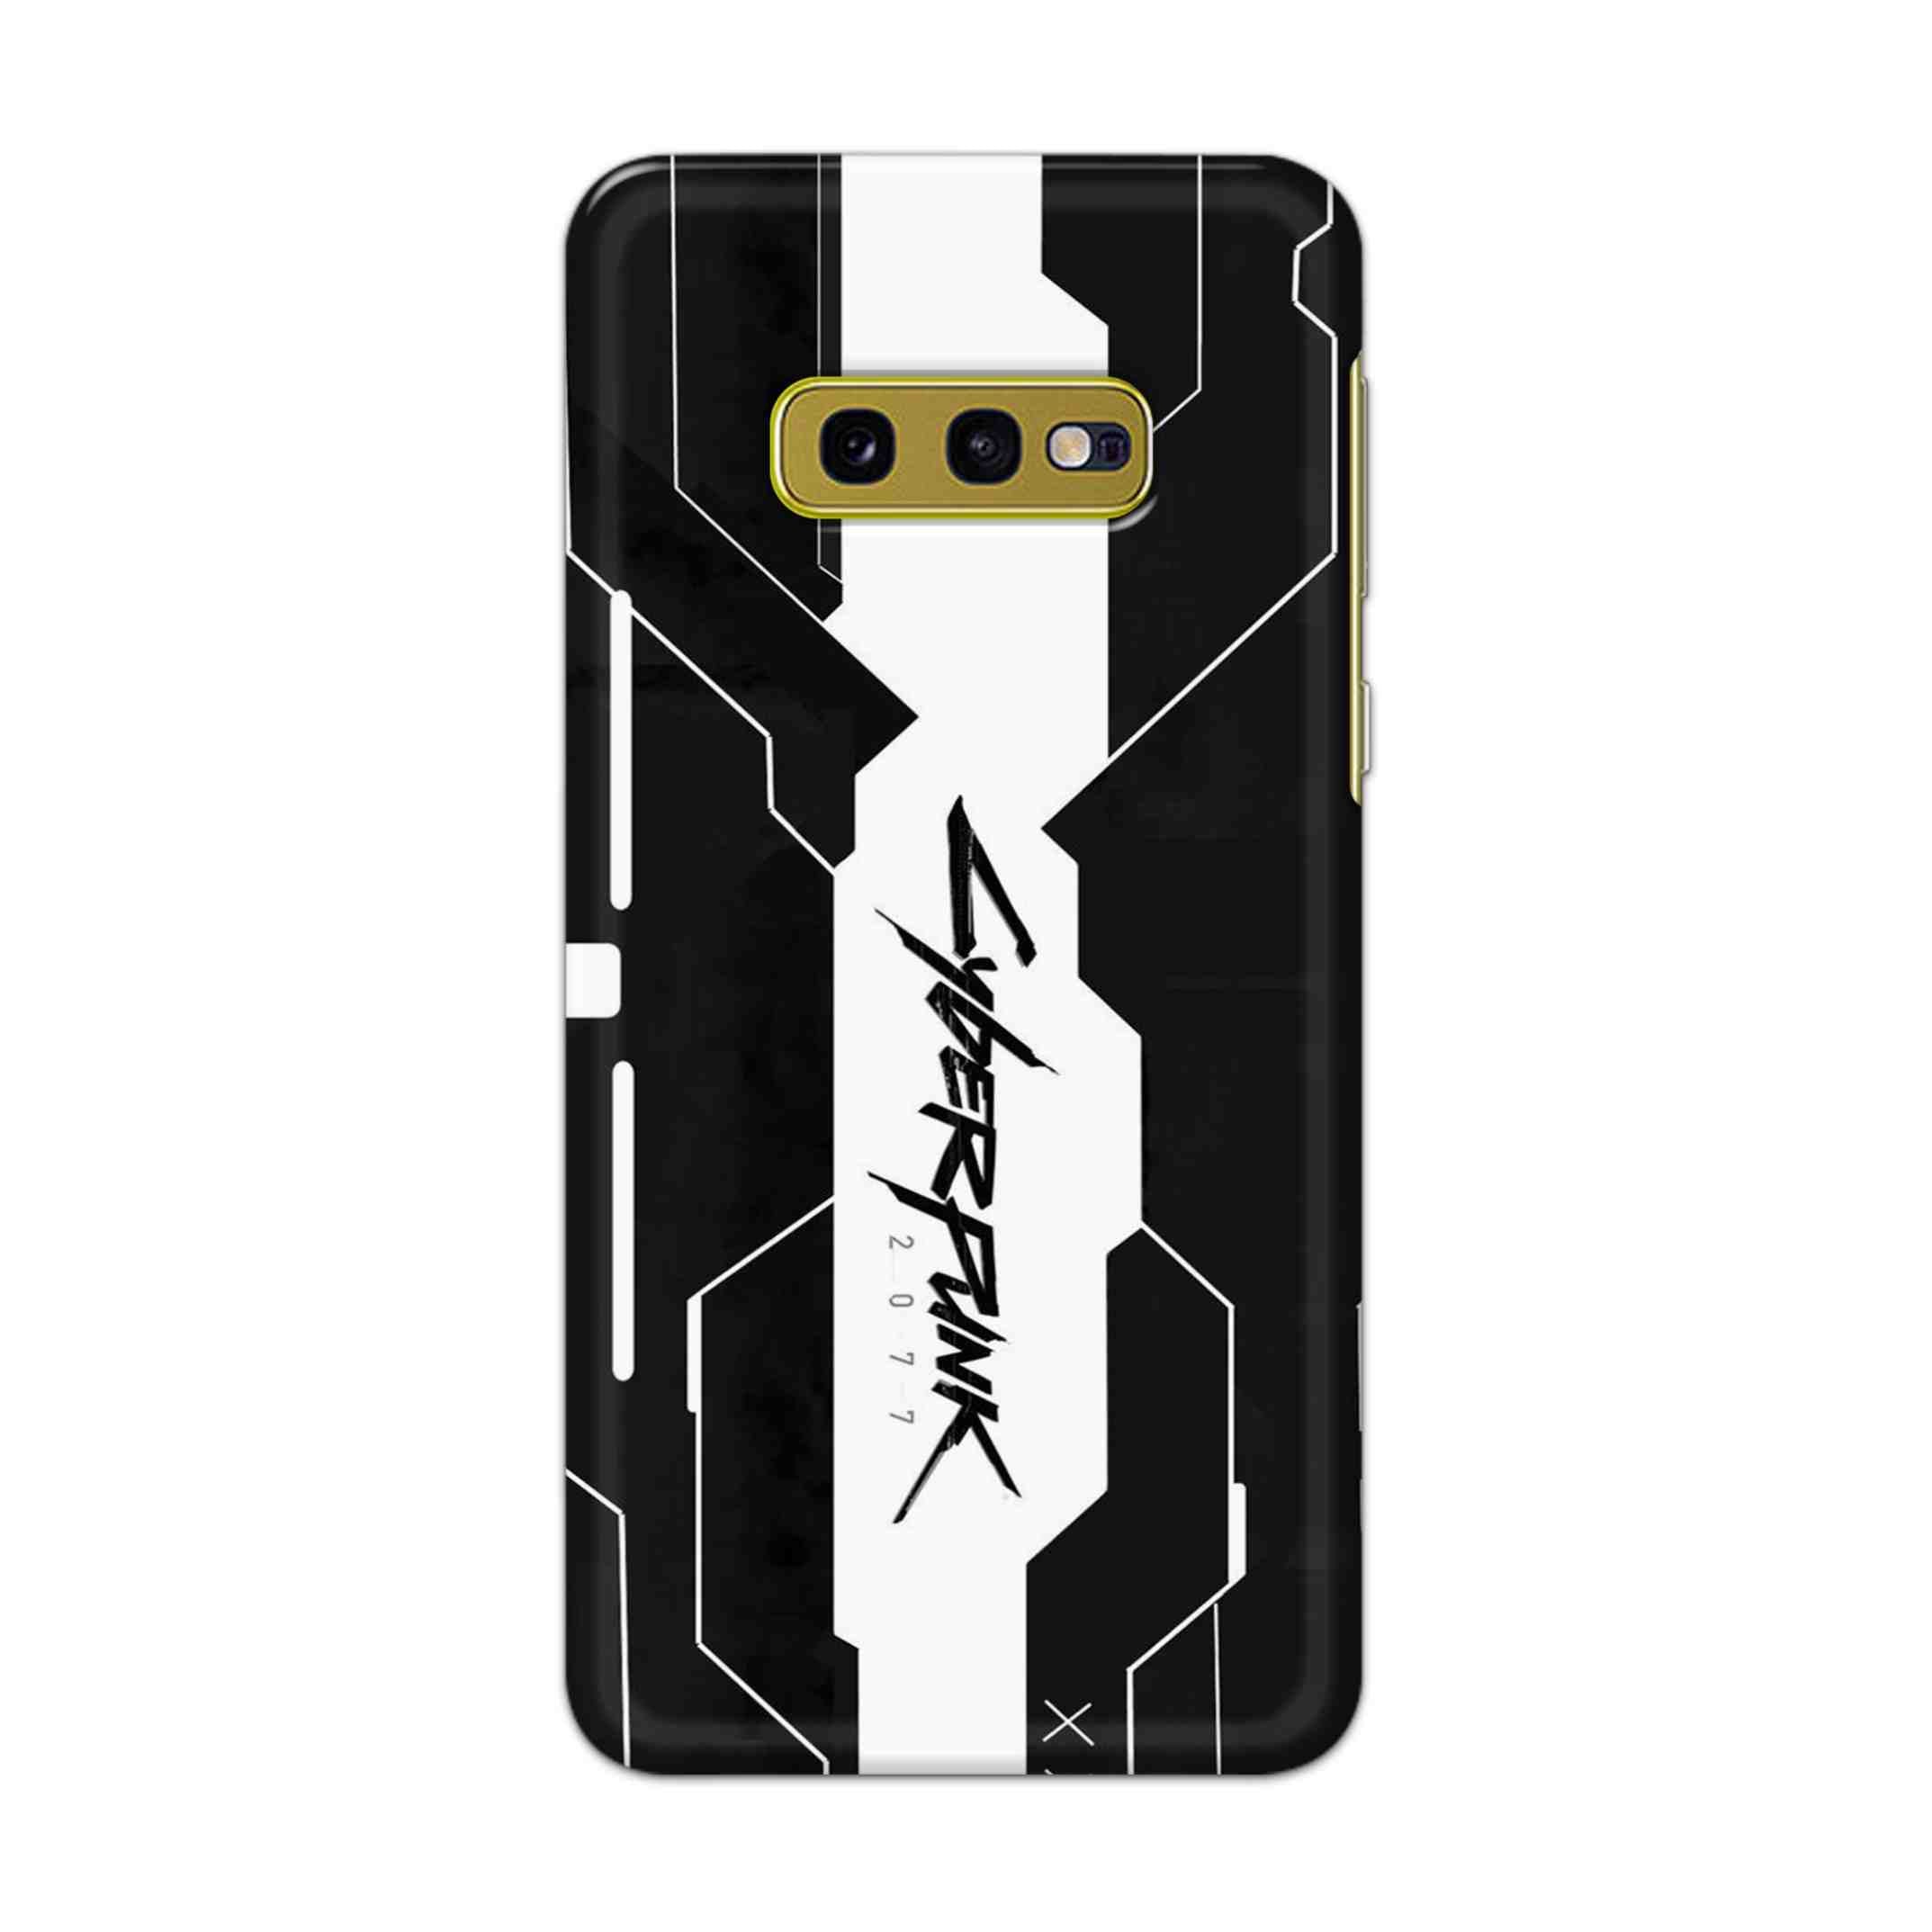 Buy Cyberpunk 2077 Art Hard Back Mobile Phone Case Cover For Samsung Galaxy S10e Online